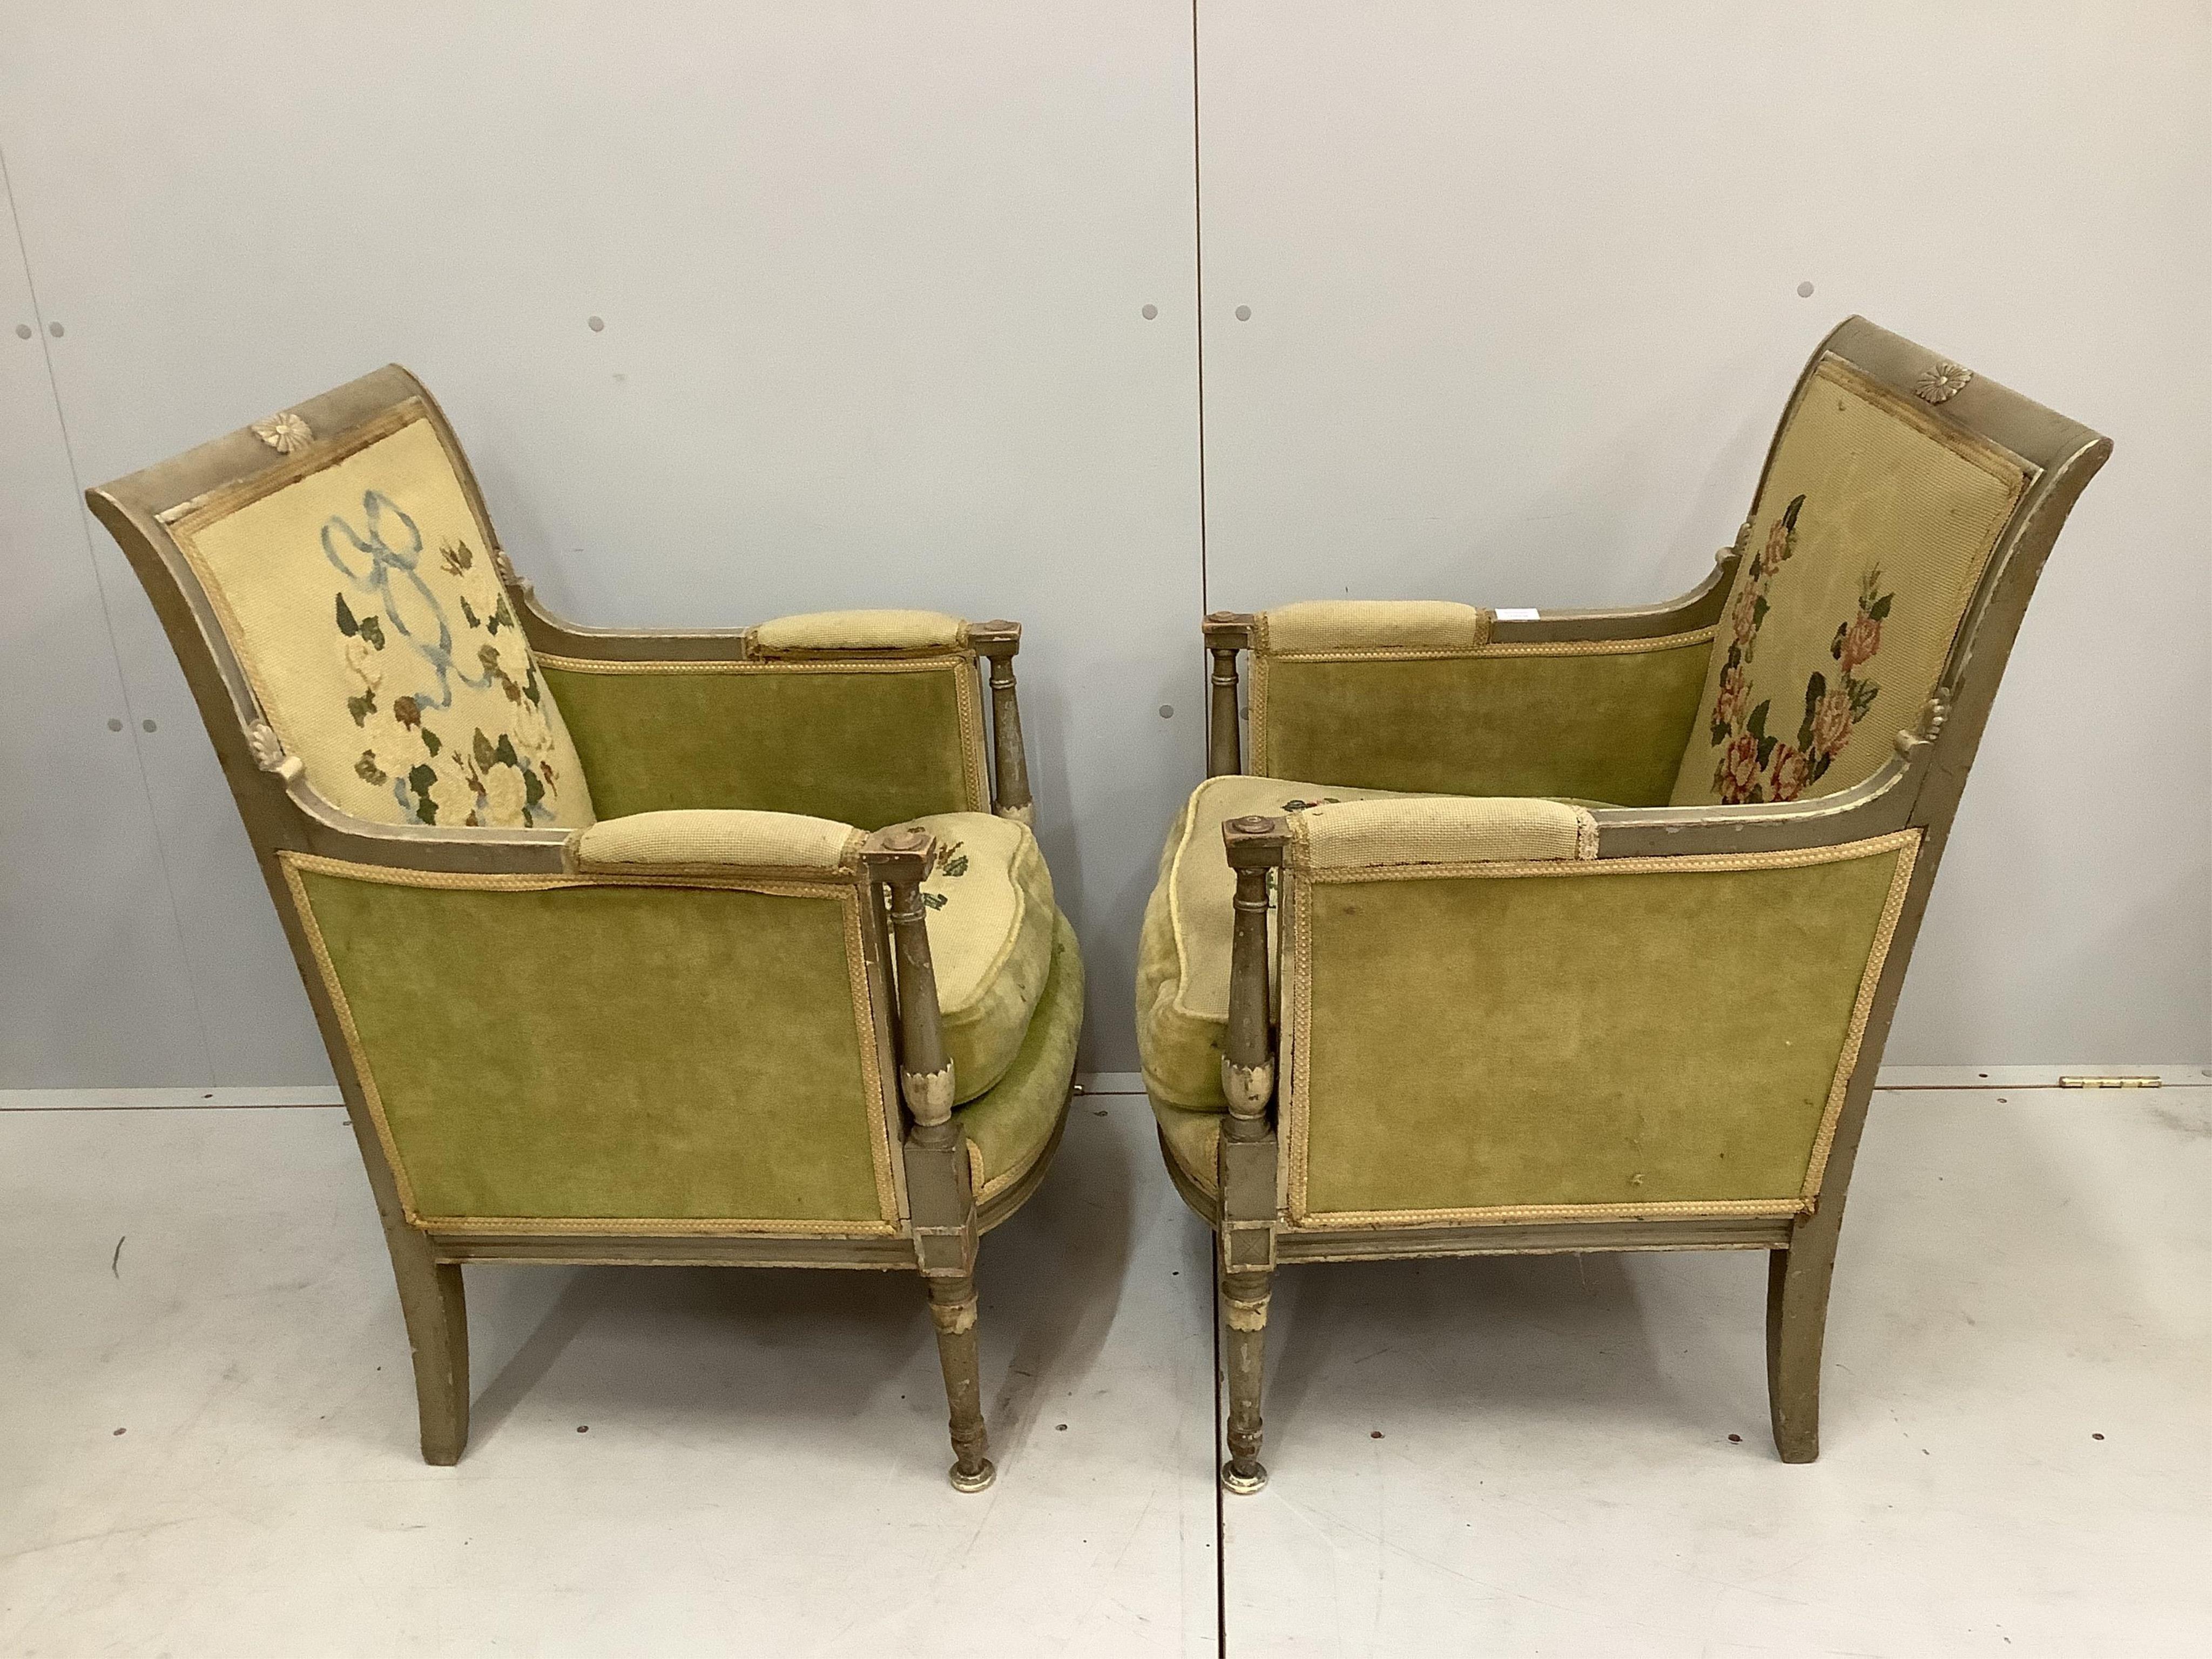 A pair of 19th century French chairs, width 60cm, depth 60cm, height 88cm